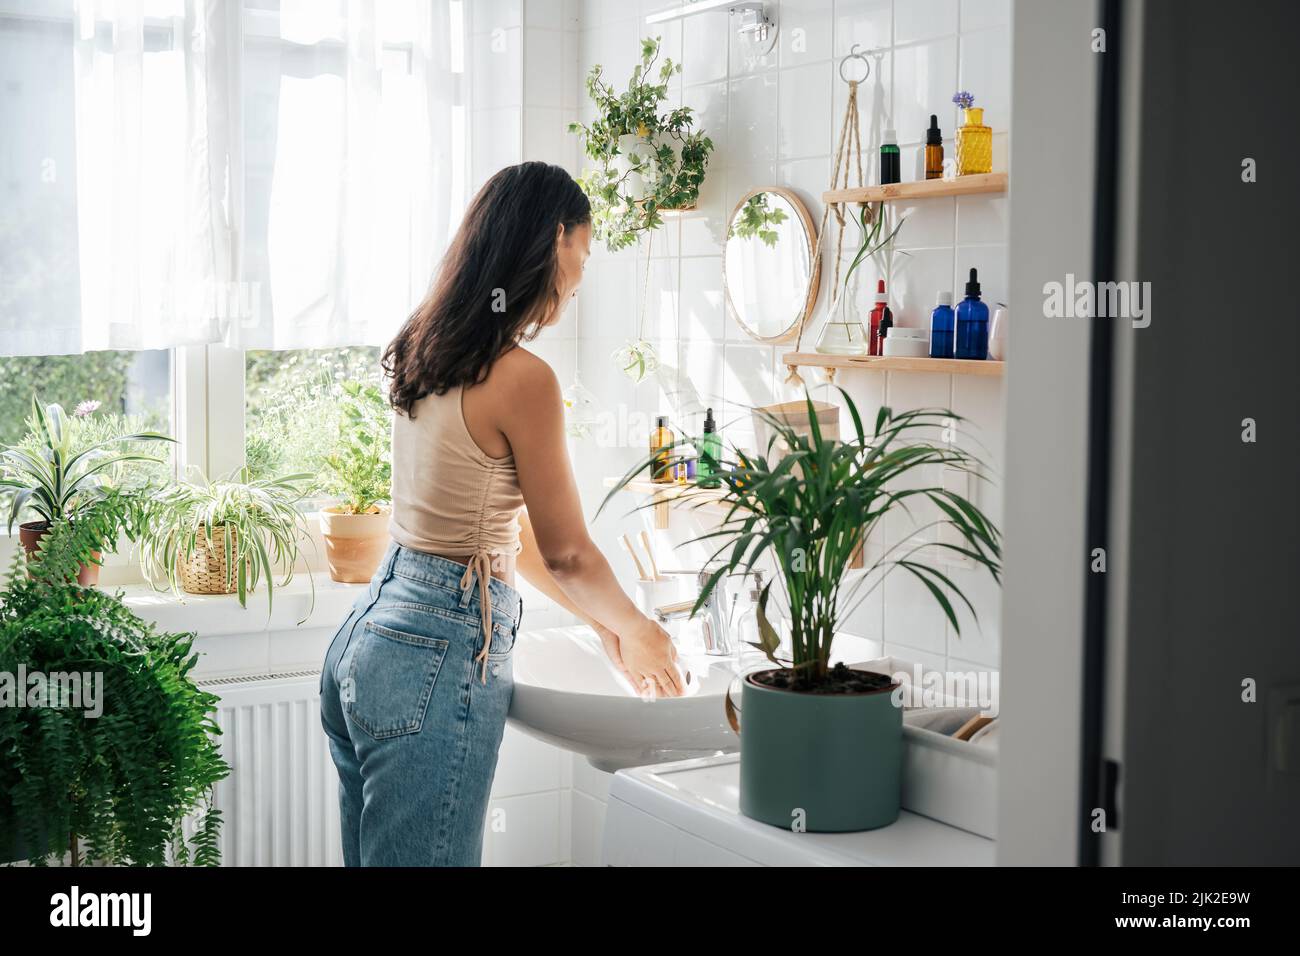 Young beautiful woman with dark skin washing hands in light bathroom with many green plants. Biophilic design of interior. Natural cosmetics, self care and wellness concept Stock Photo